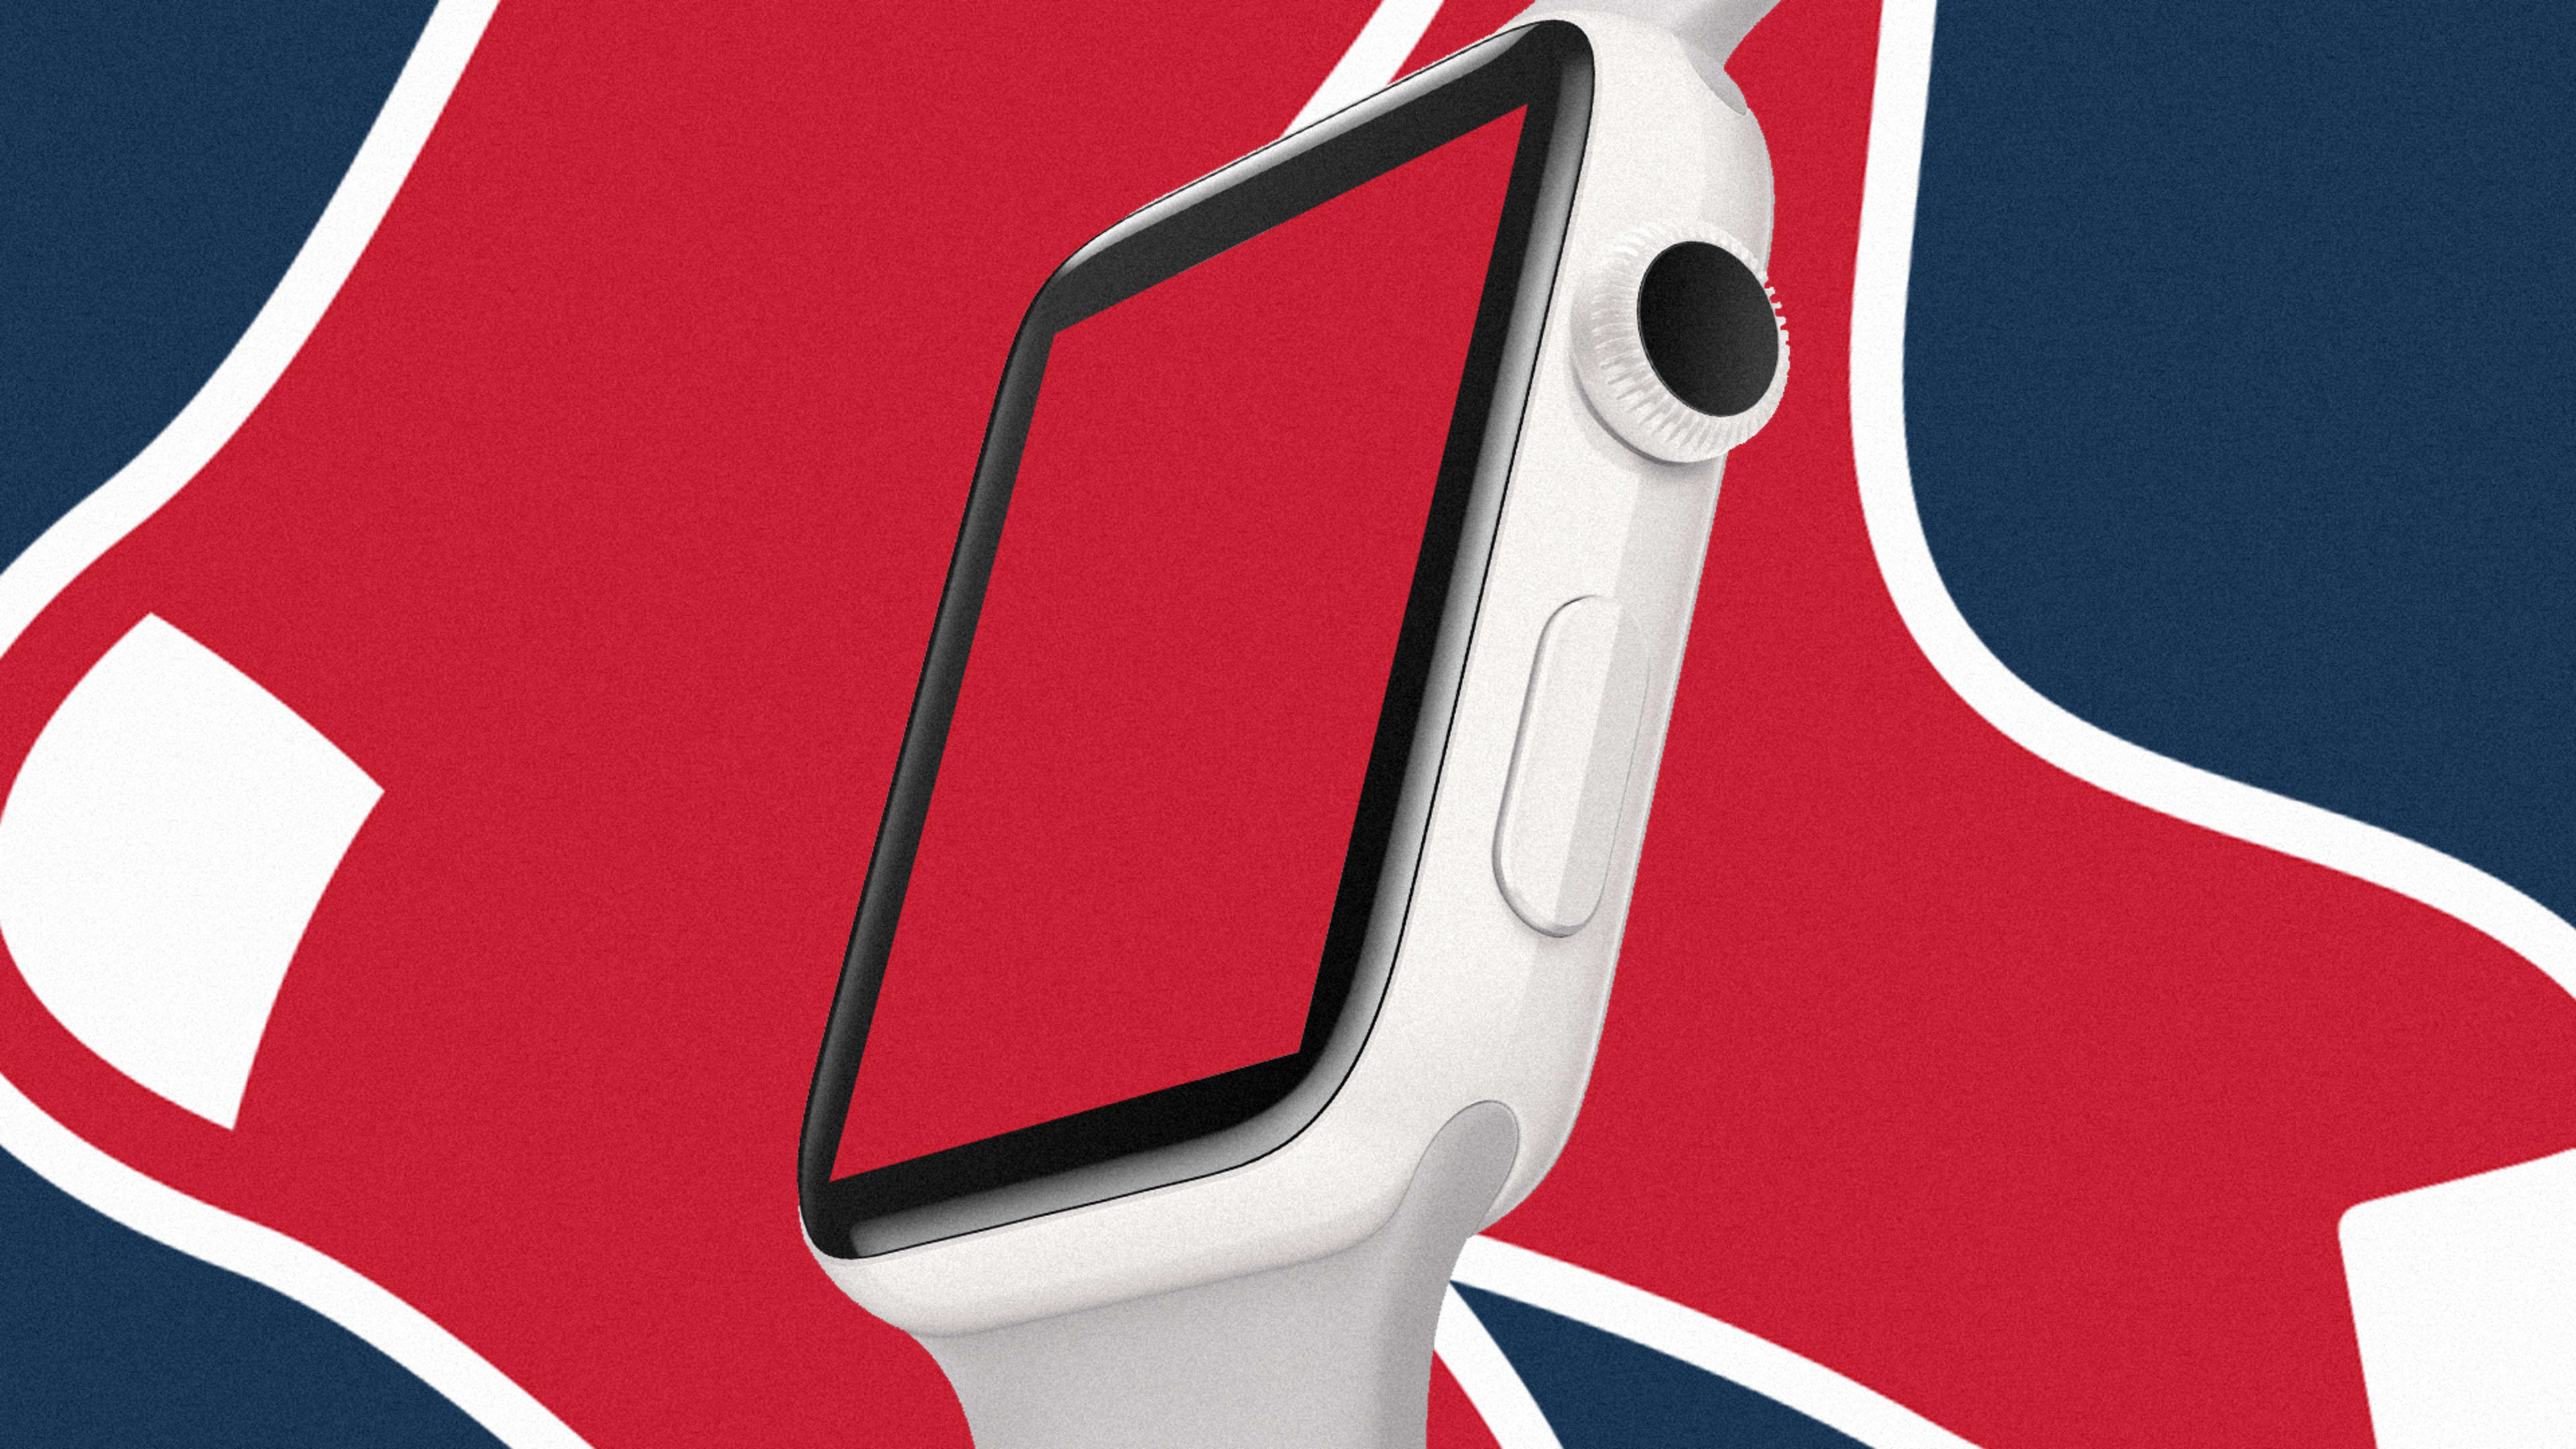 How an Apple Watch helped the Red Sox cheat, say baseball investigators